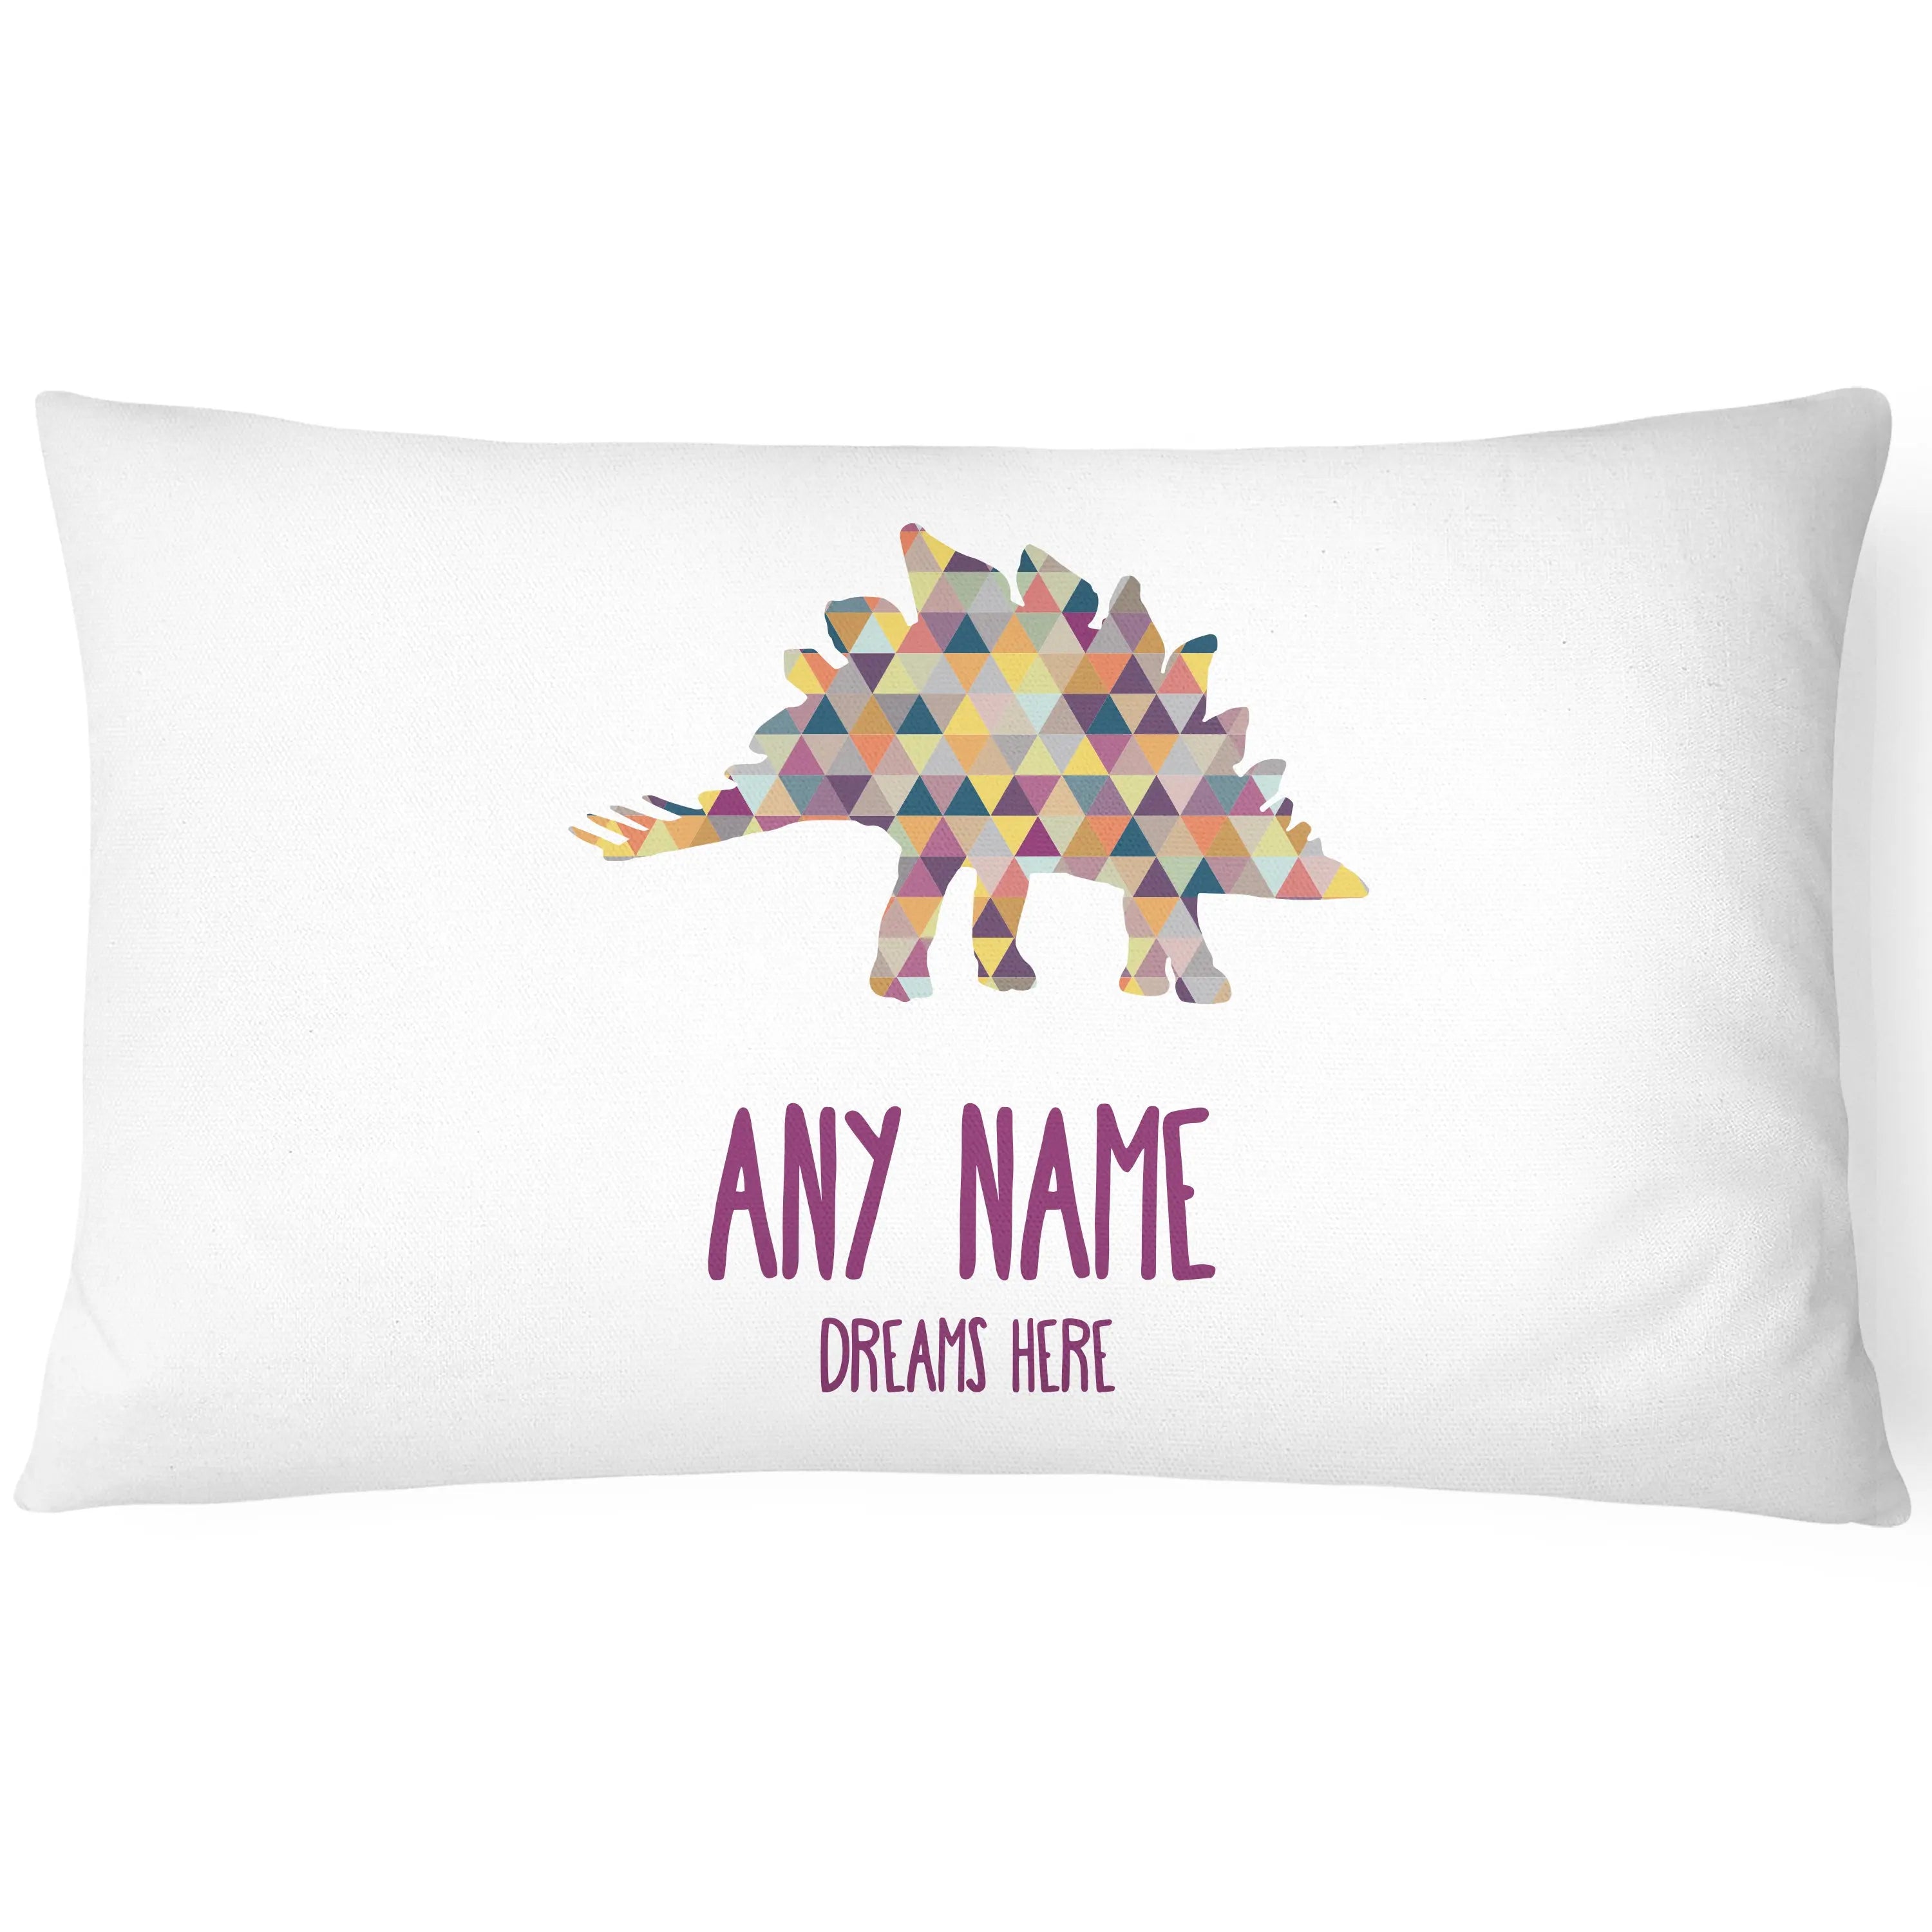 Dinosaur Children's Pillowcase - Personalise with Any Name - Spike - CushionPop